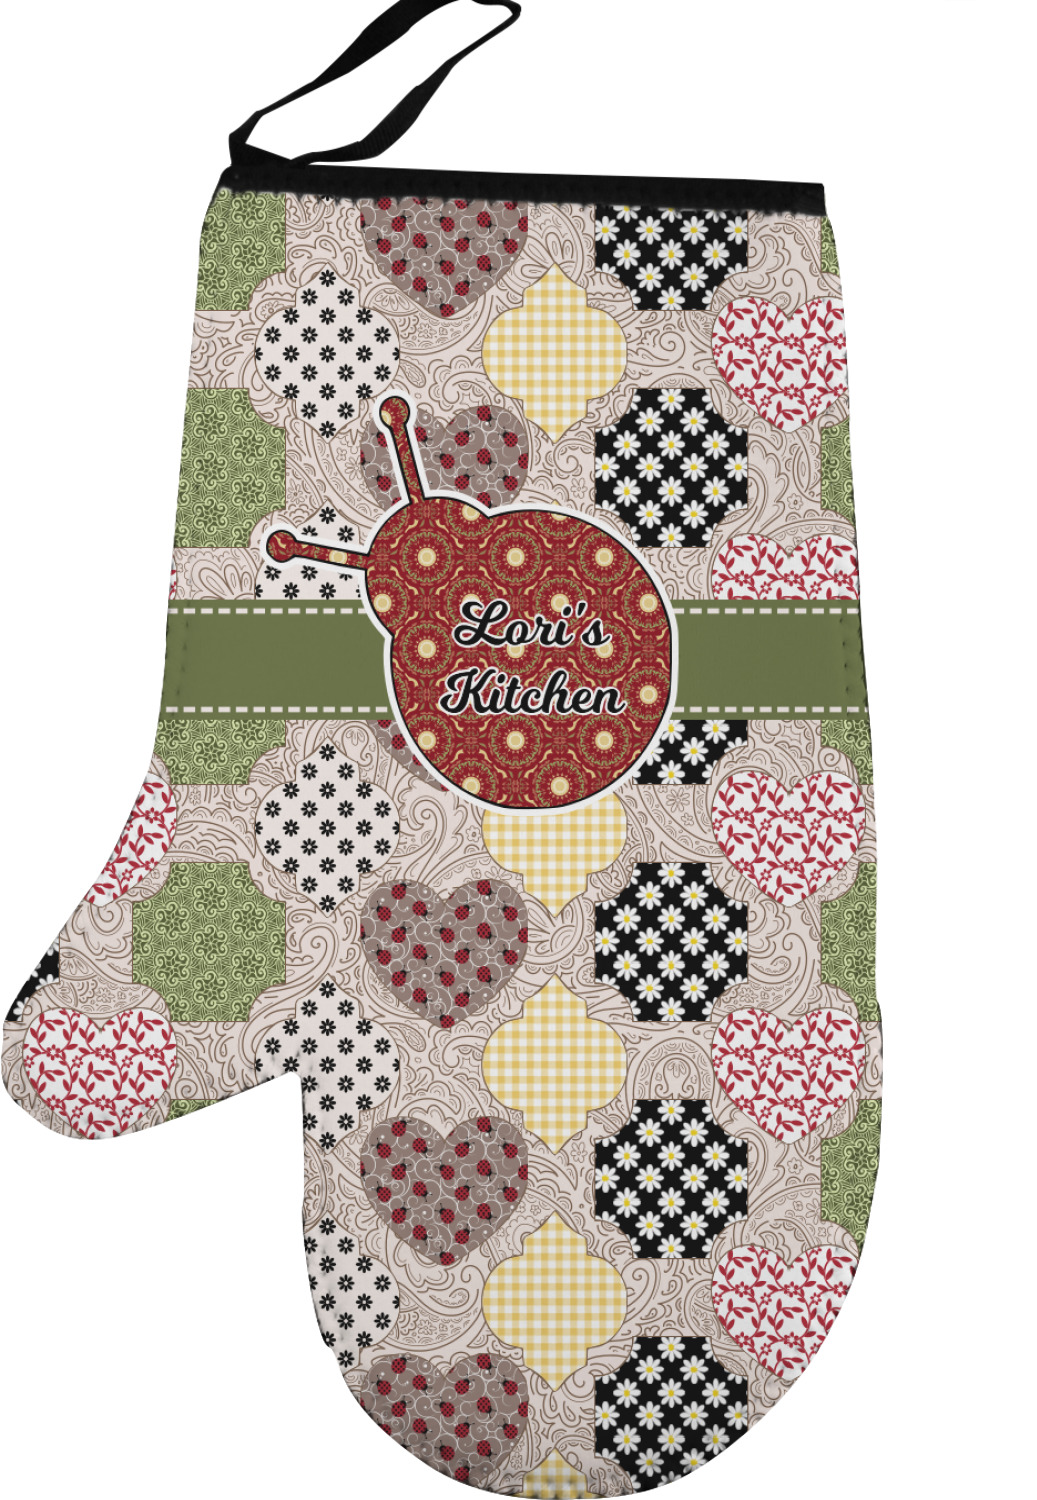 DIY Cute Oven Mitts - Michelle James Designs